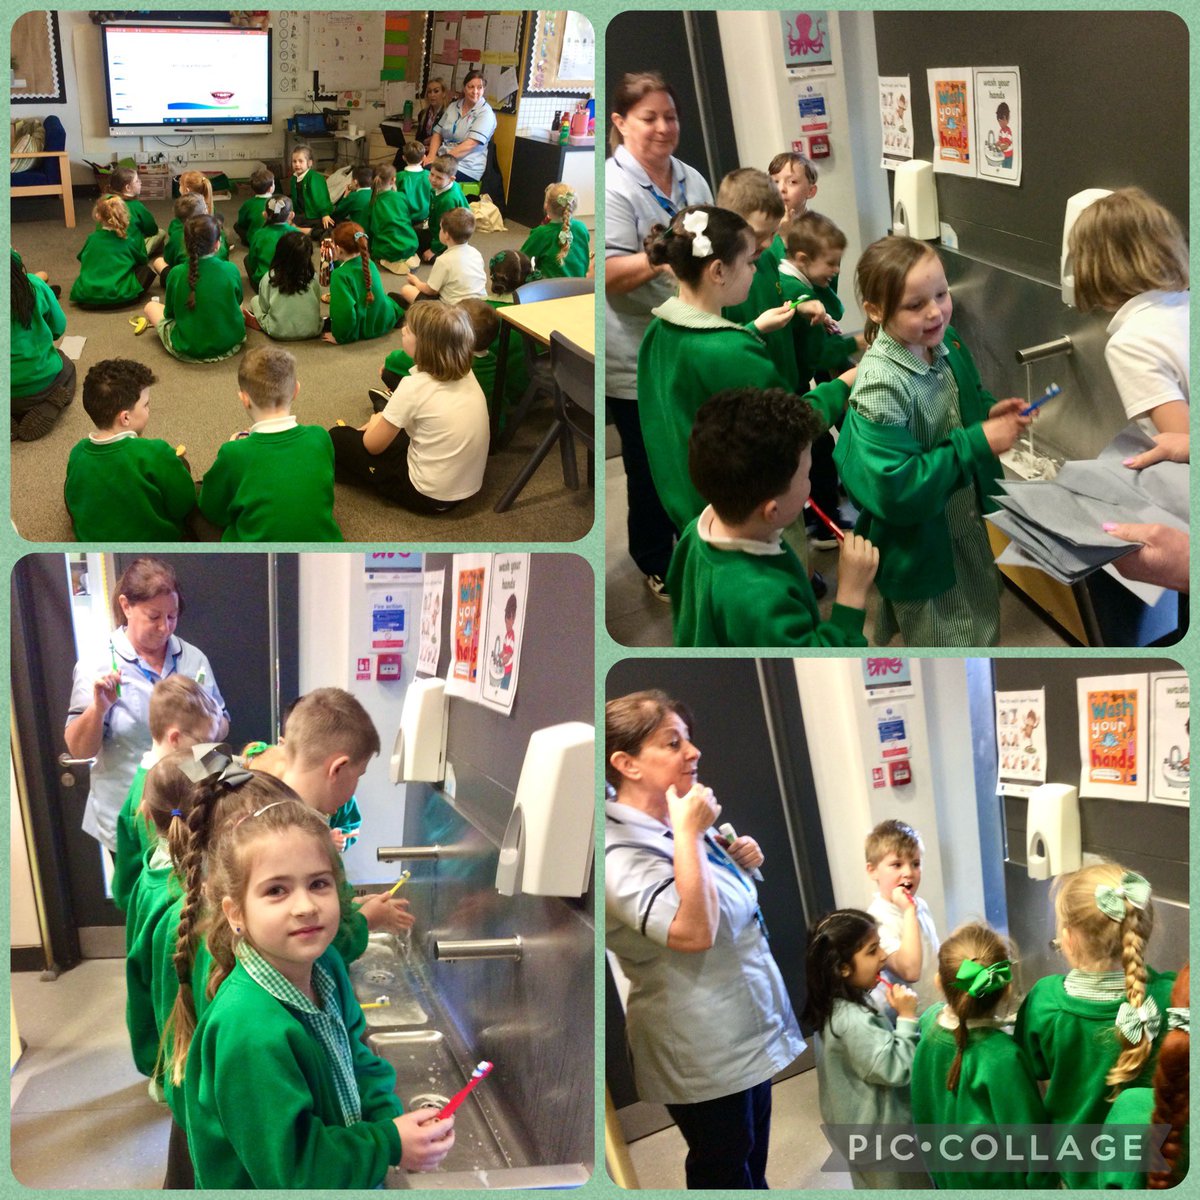 Year 2 enjoyed learning about the importance of personal hygiene with the school nurse, as part of their @Curriculum_USP science unit “Animals including Humans”, where they practised brushing their teeth.